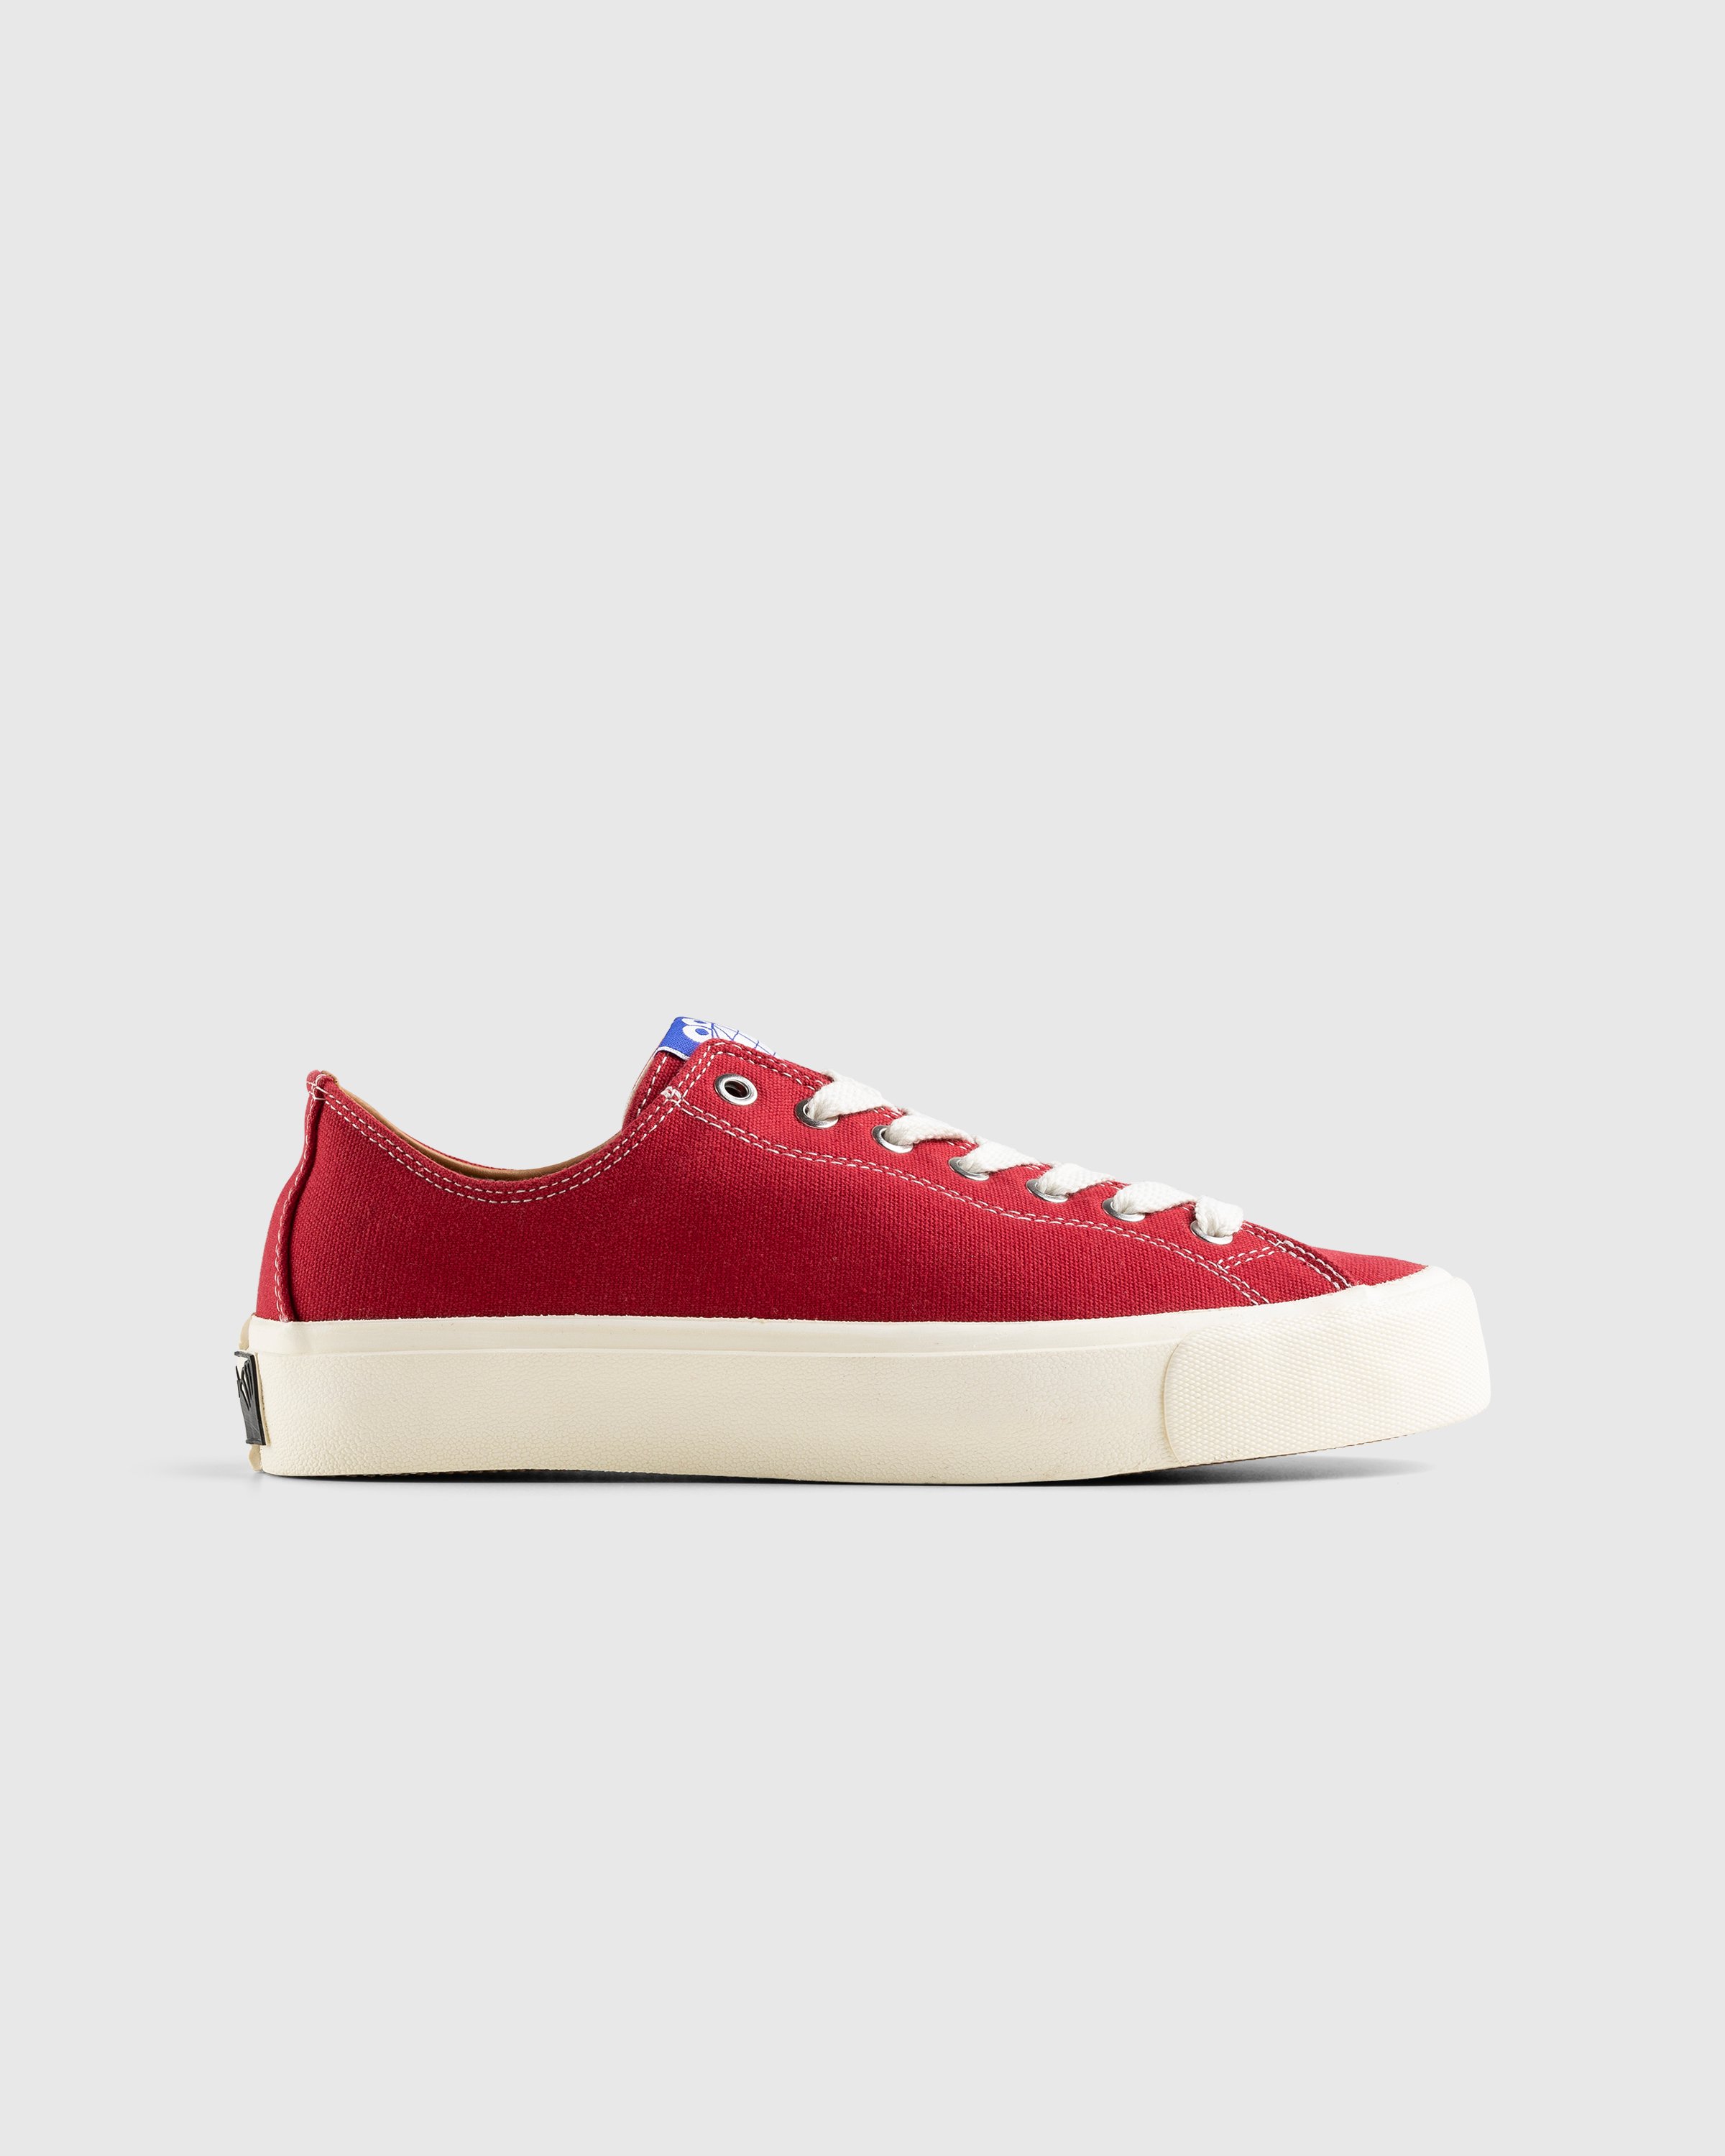 Last Resort AB - VM003-Canvas LO Classic Red/White - Footwear - Red - Image 1